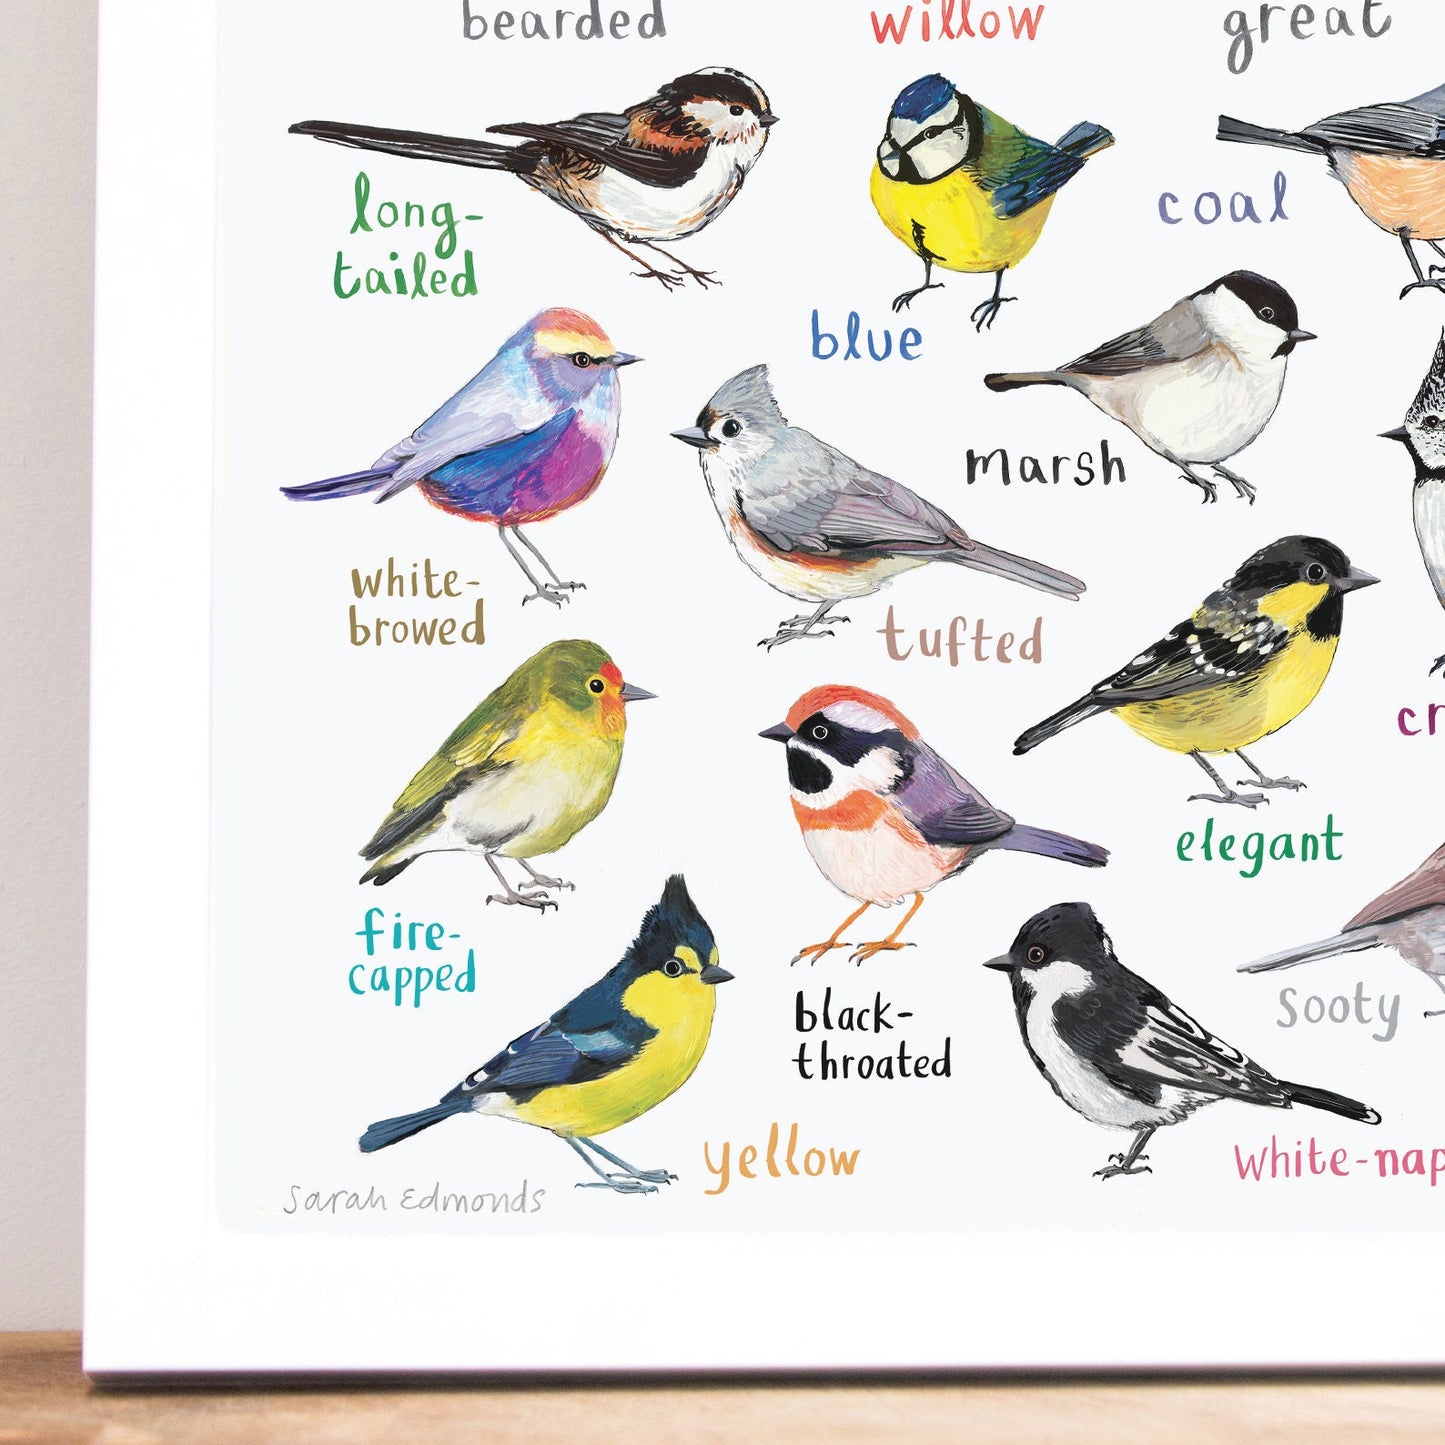 Tits of the WORLD - Bird Art Print - A4 - new edition!